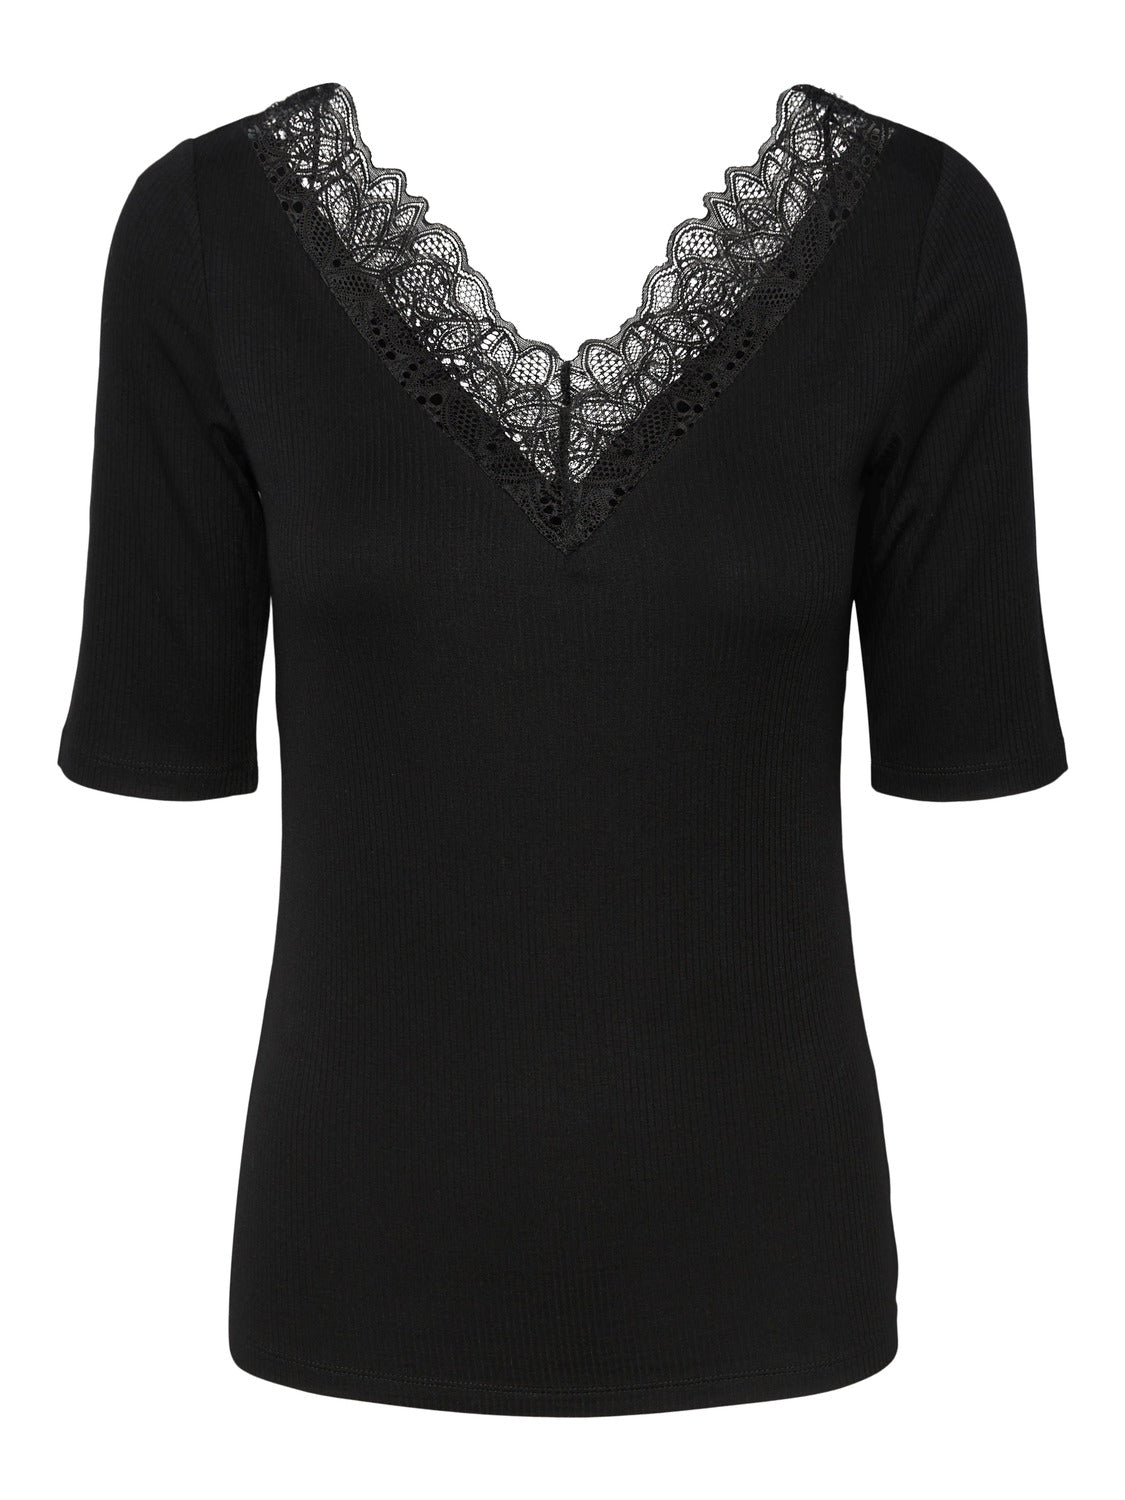 YASELLE T-SHIRTS & TOPS - Black